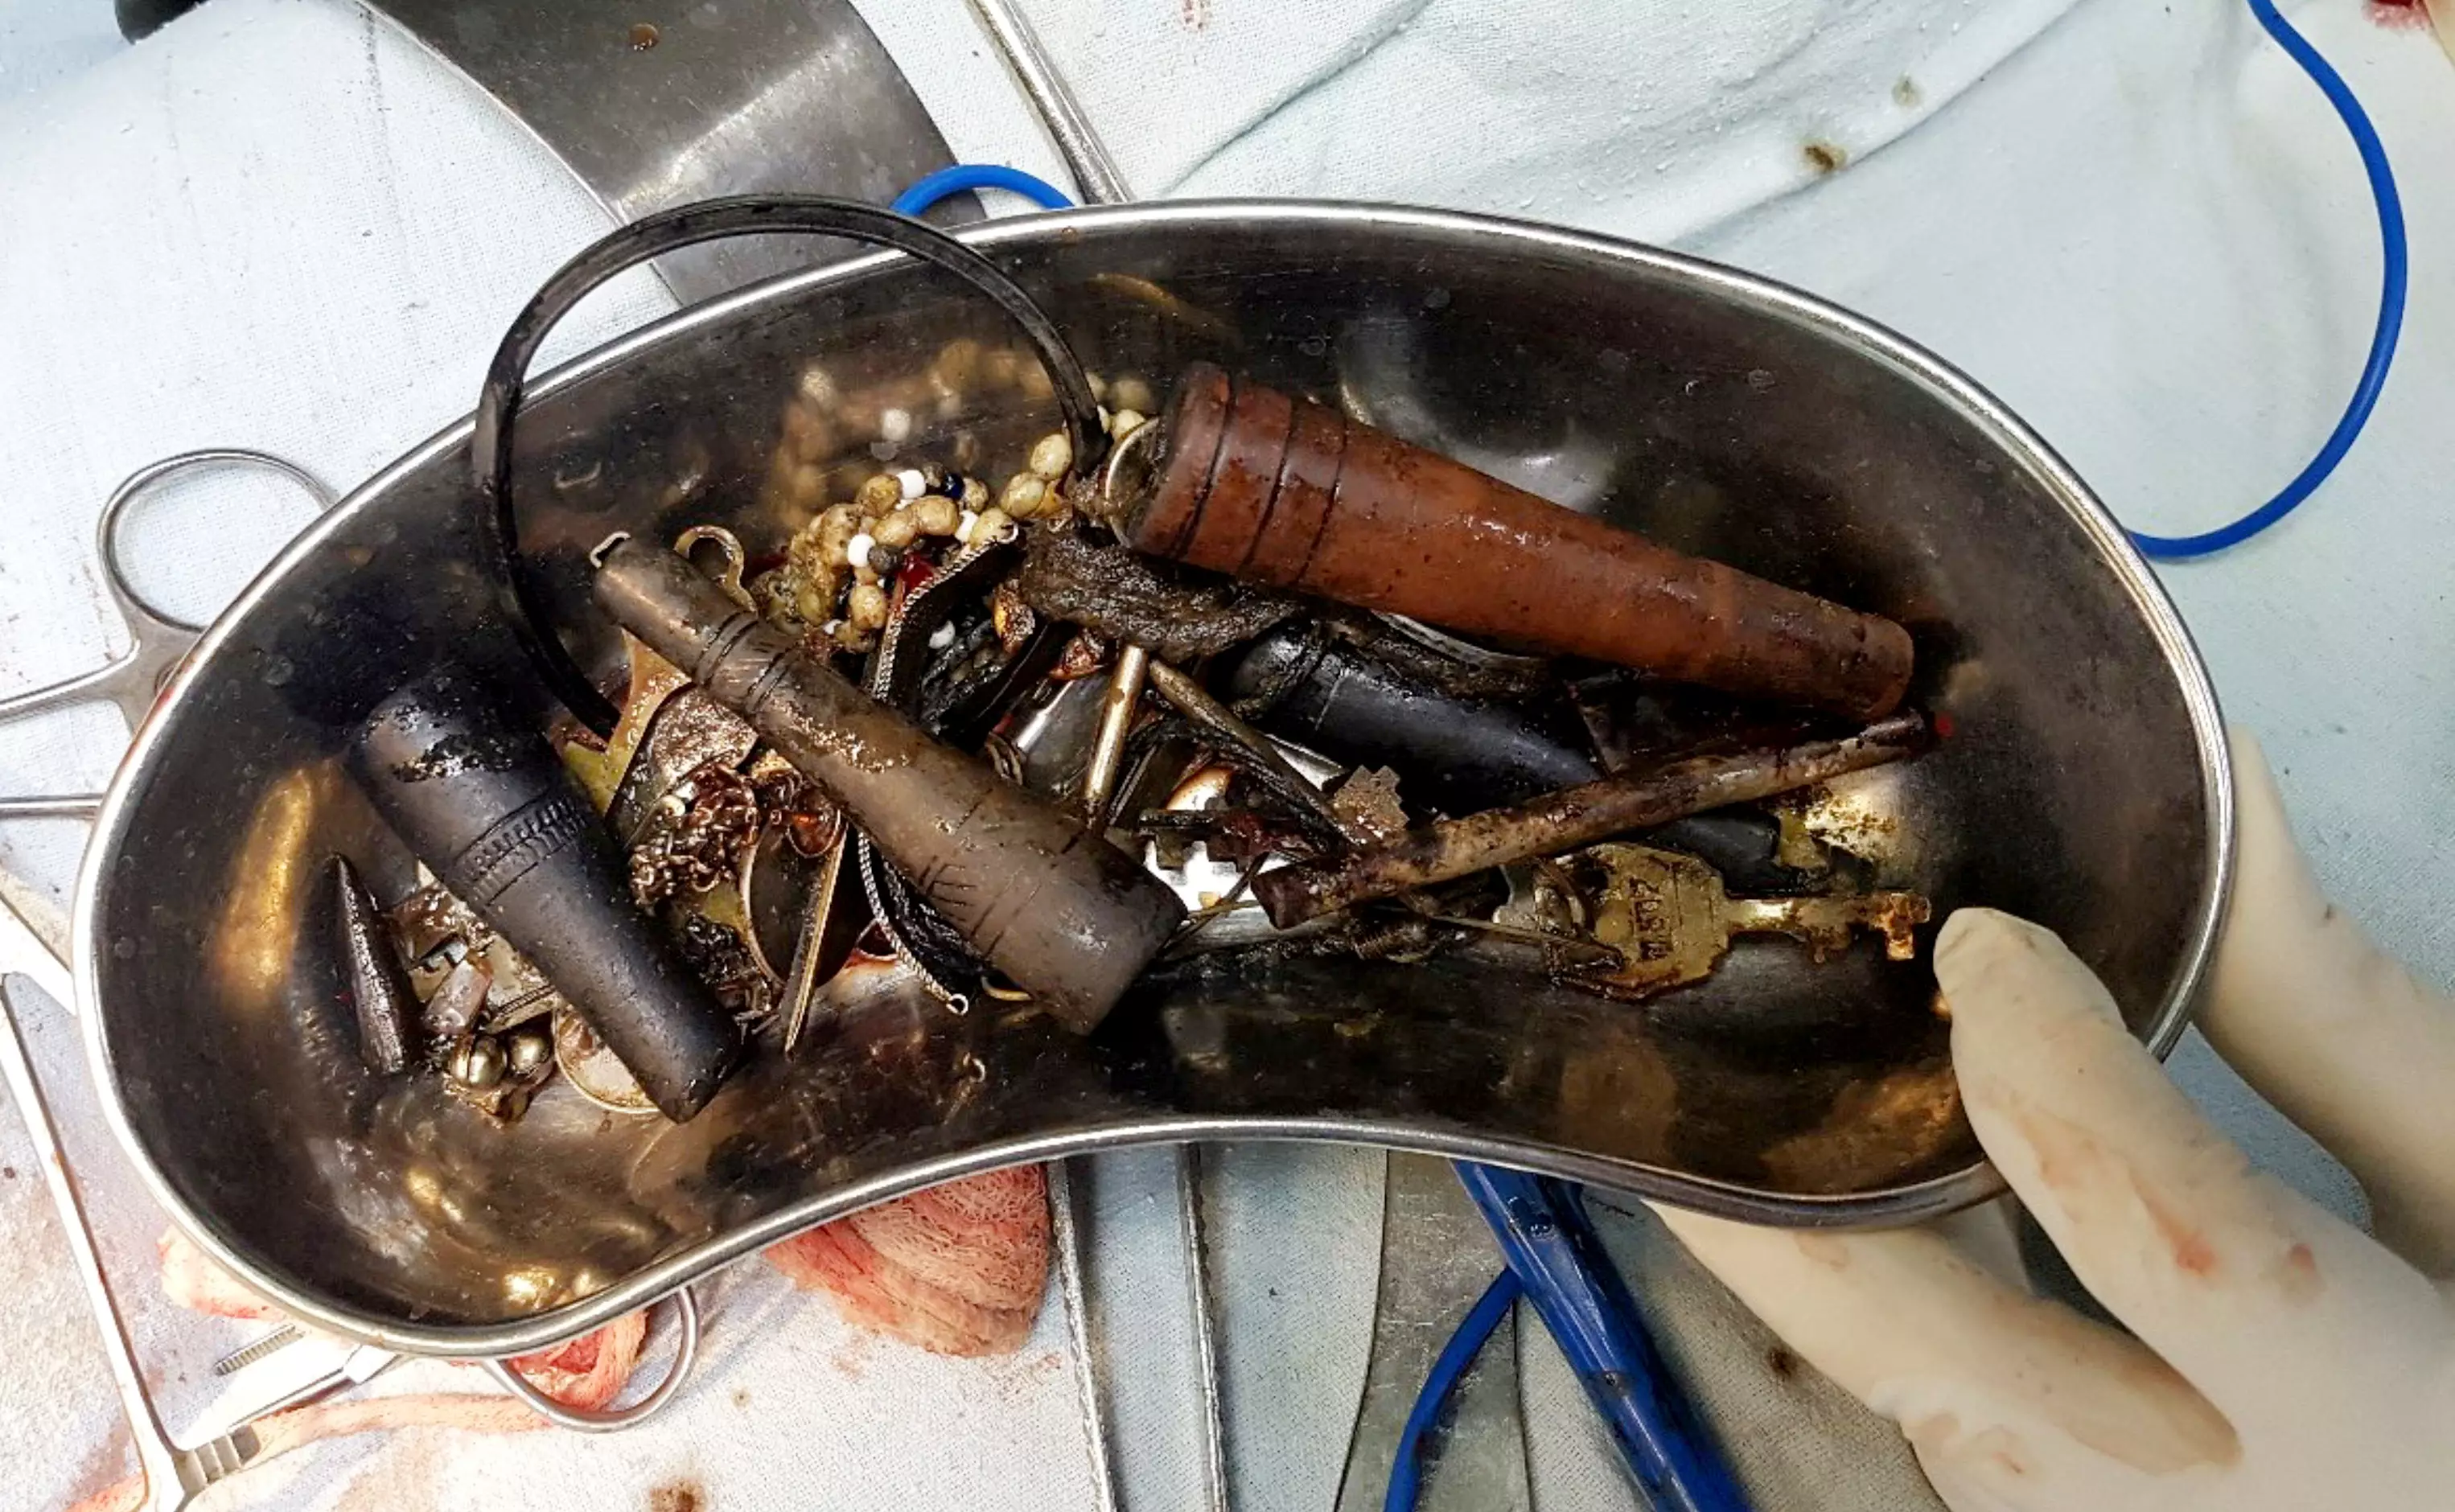 Surgeons pulled 80 items out of the 24-year-old man.